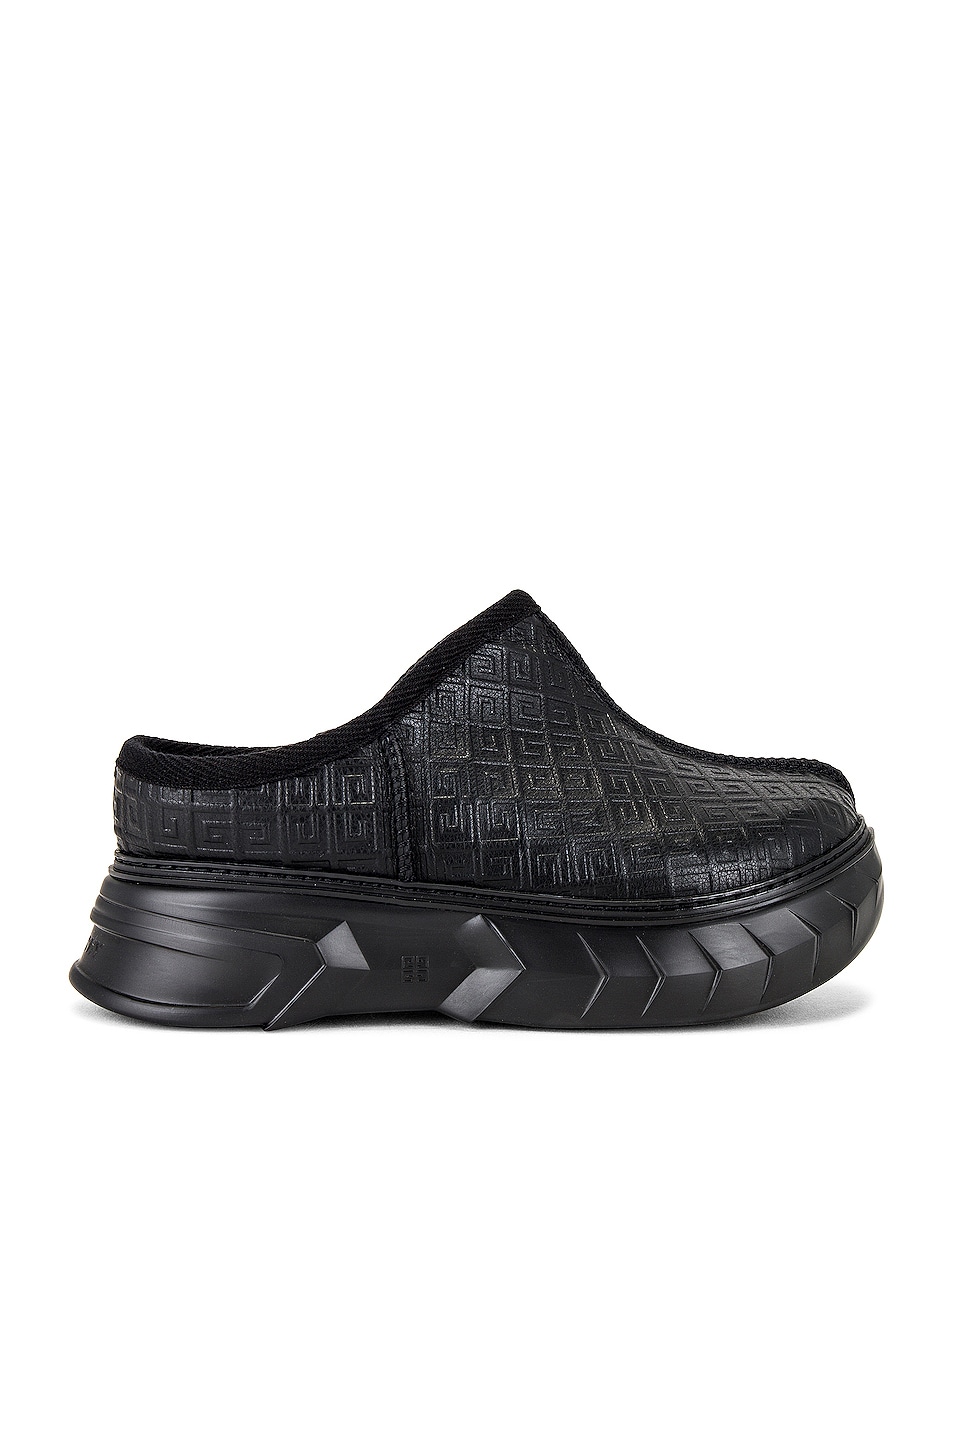 Image 1 of Givenchy Winter Mallow Slipper in Black